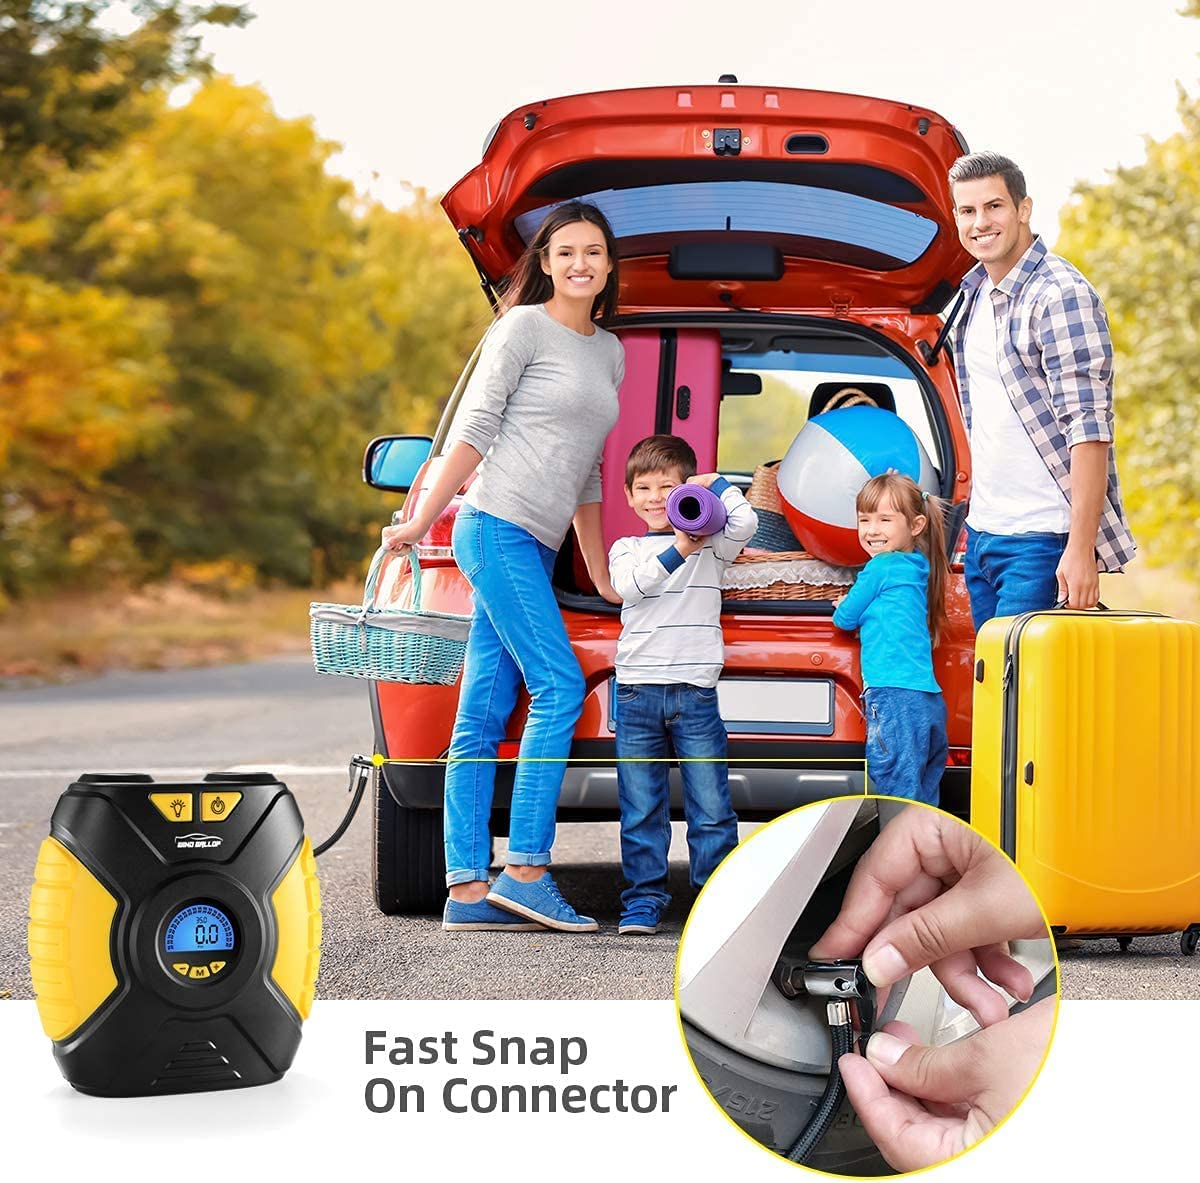 Digital Car Tyre Inflator Air Tool Portable Air Compressor Car Tyre Pump Automatic 12V Electric Air Pump Tyre Inflation with Tyre Pressure Gauge Valve Adaptors LED Light